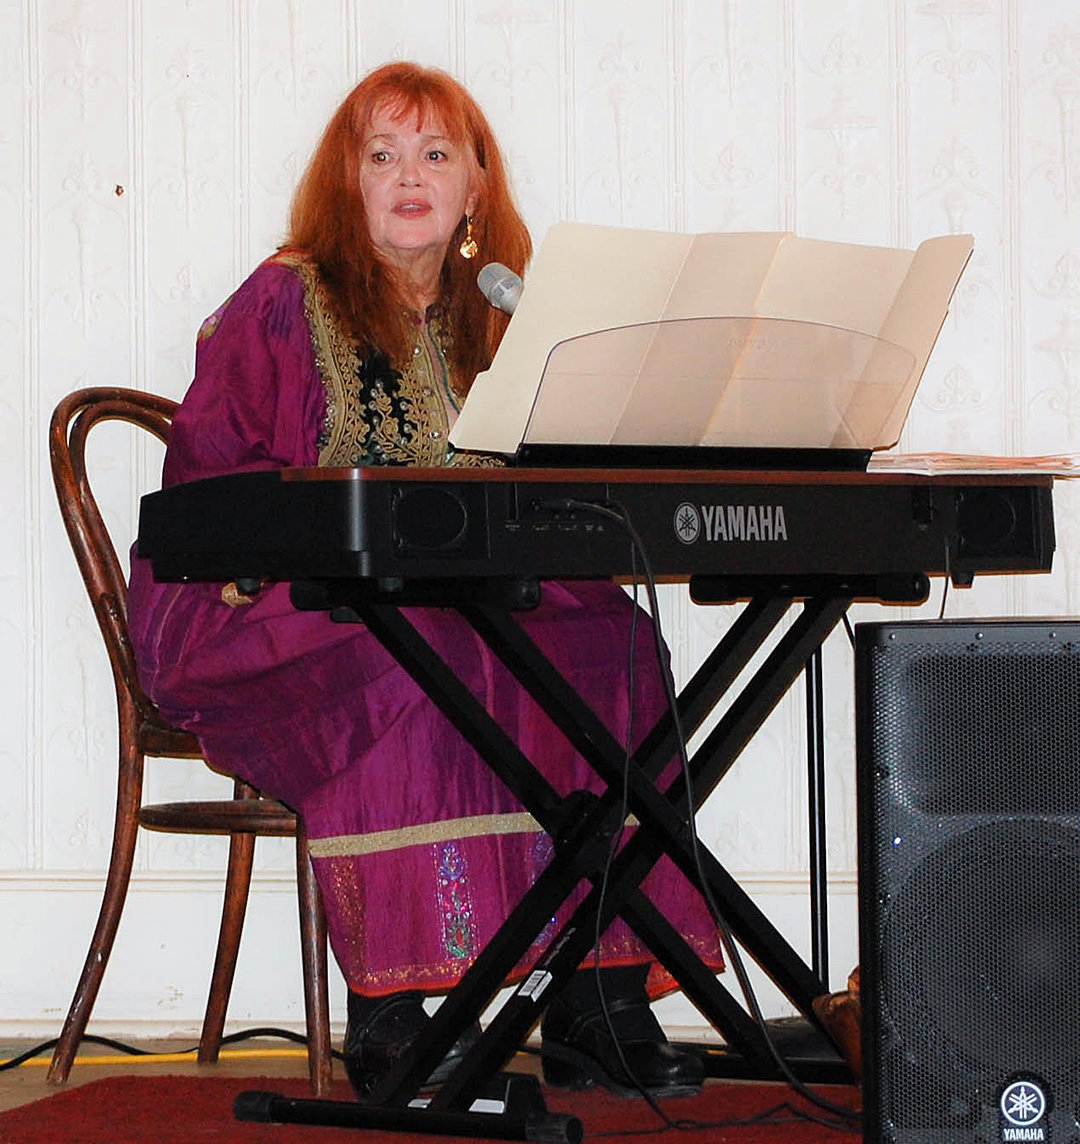 Playing both guitar and keyboards, Kathy Geary entertained in the ballroom at the Western Hotel, sharing songs and stories covering Joni Mitchell's career.